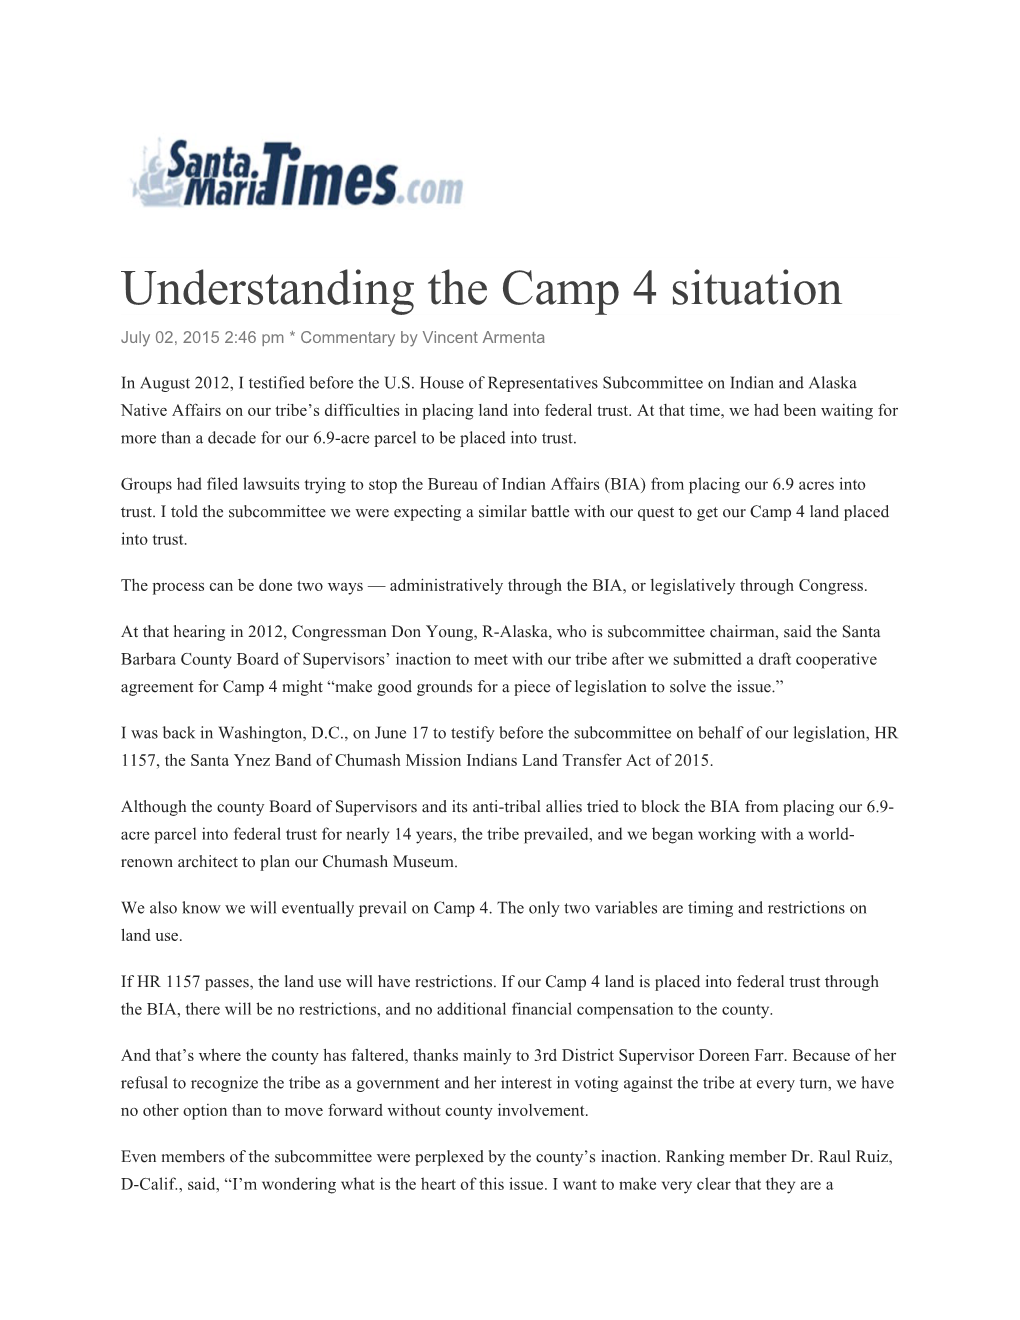 Understanding the Camp 4 Situation